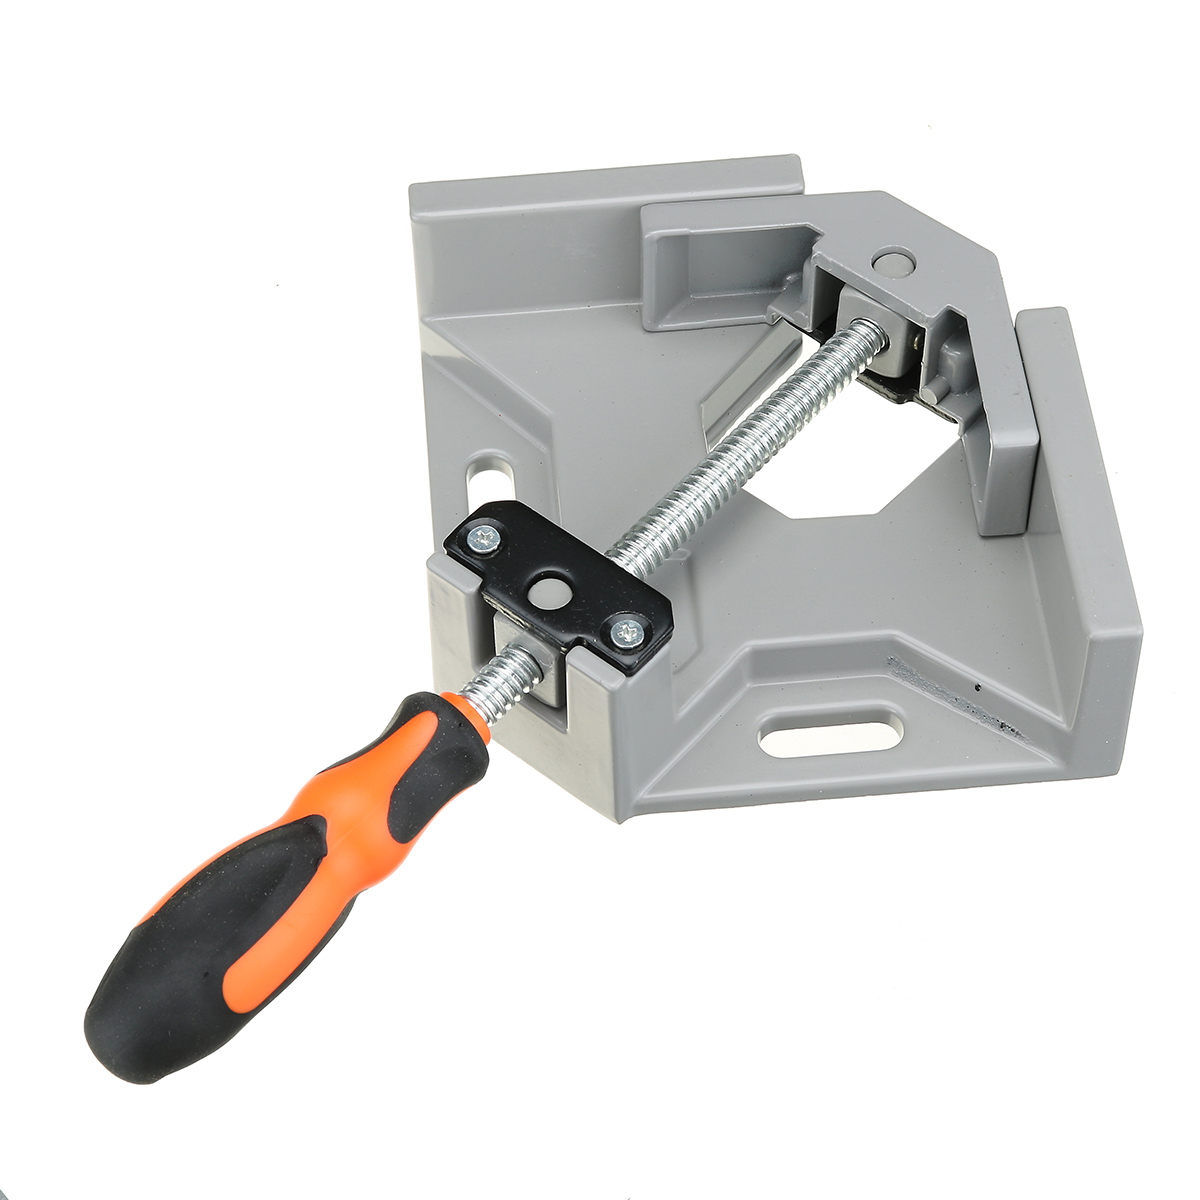 90-Degree-Quick-Release-Corner-Clamp-Right-Angle-Welding-Woodworking-Photo-Frame-Clamping-Tool-1768833-6